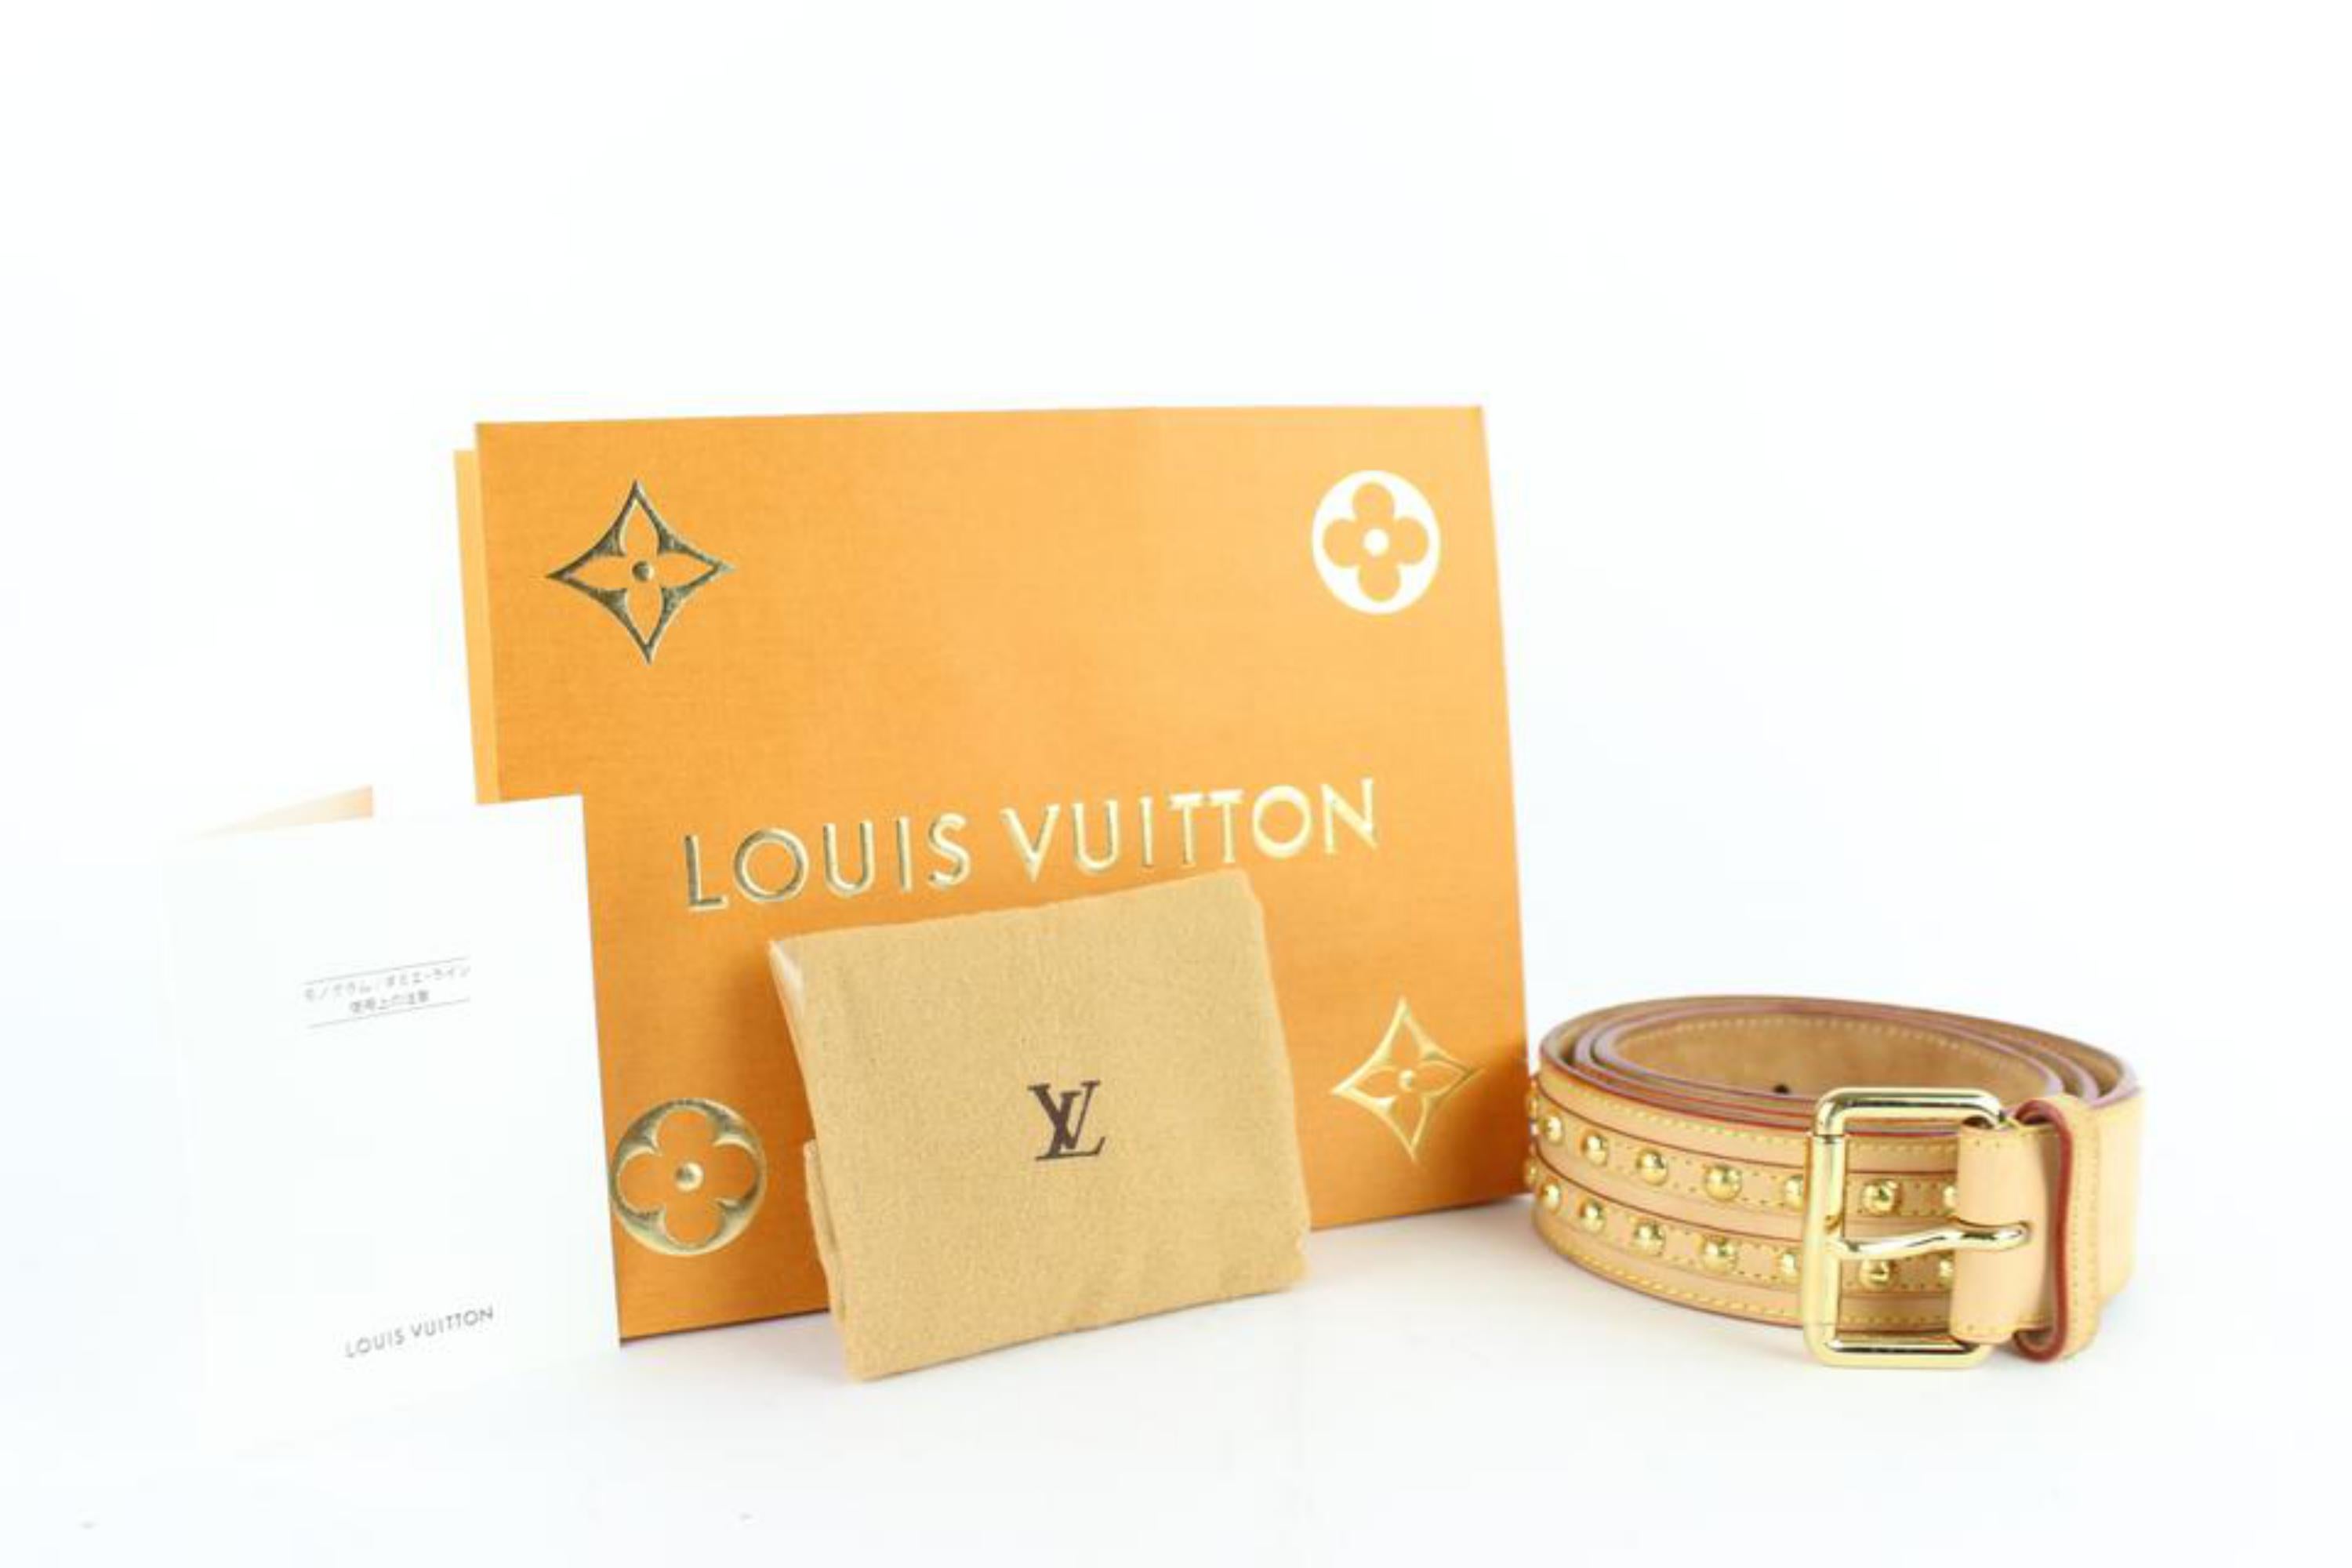 Louis Vuitton Mini Runway Belt Grey and Silver Leather 12al529